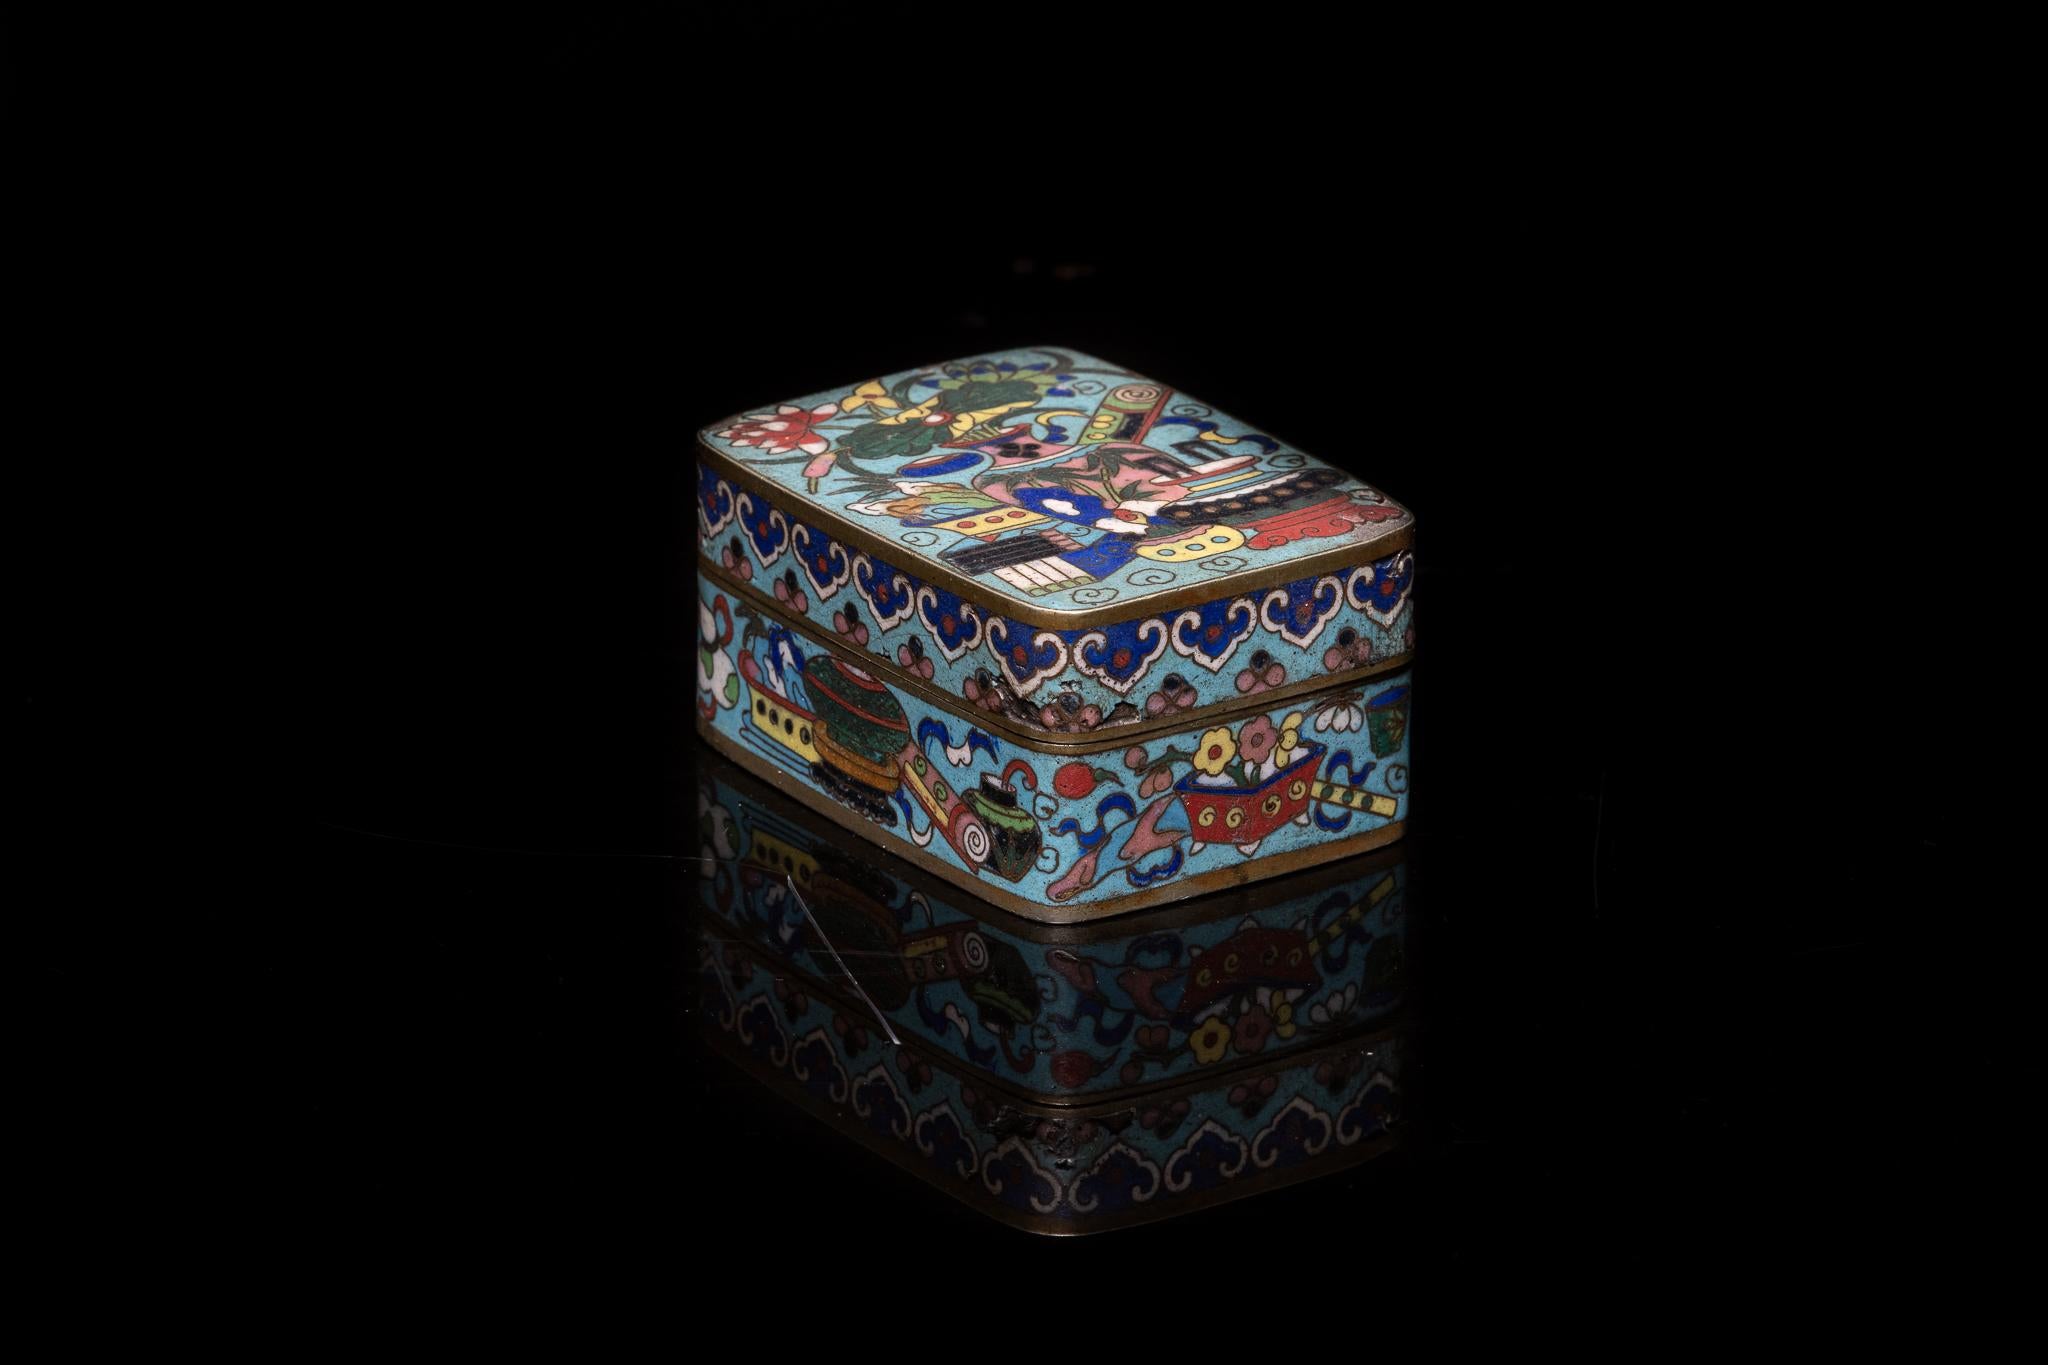 Hand-Crafted Antique Asian Chinese Opium Box Cloisonné Enamel, Tobacco Snuff Box Floral Motif For Sale